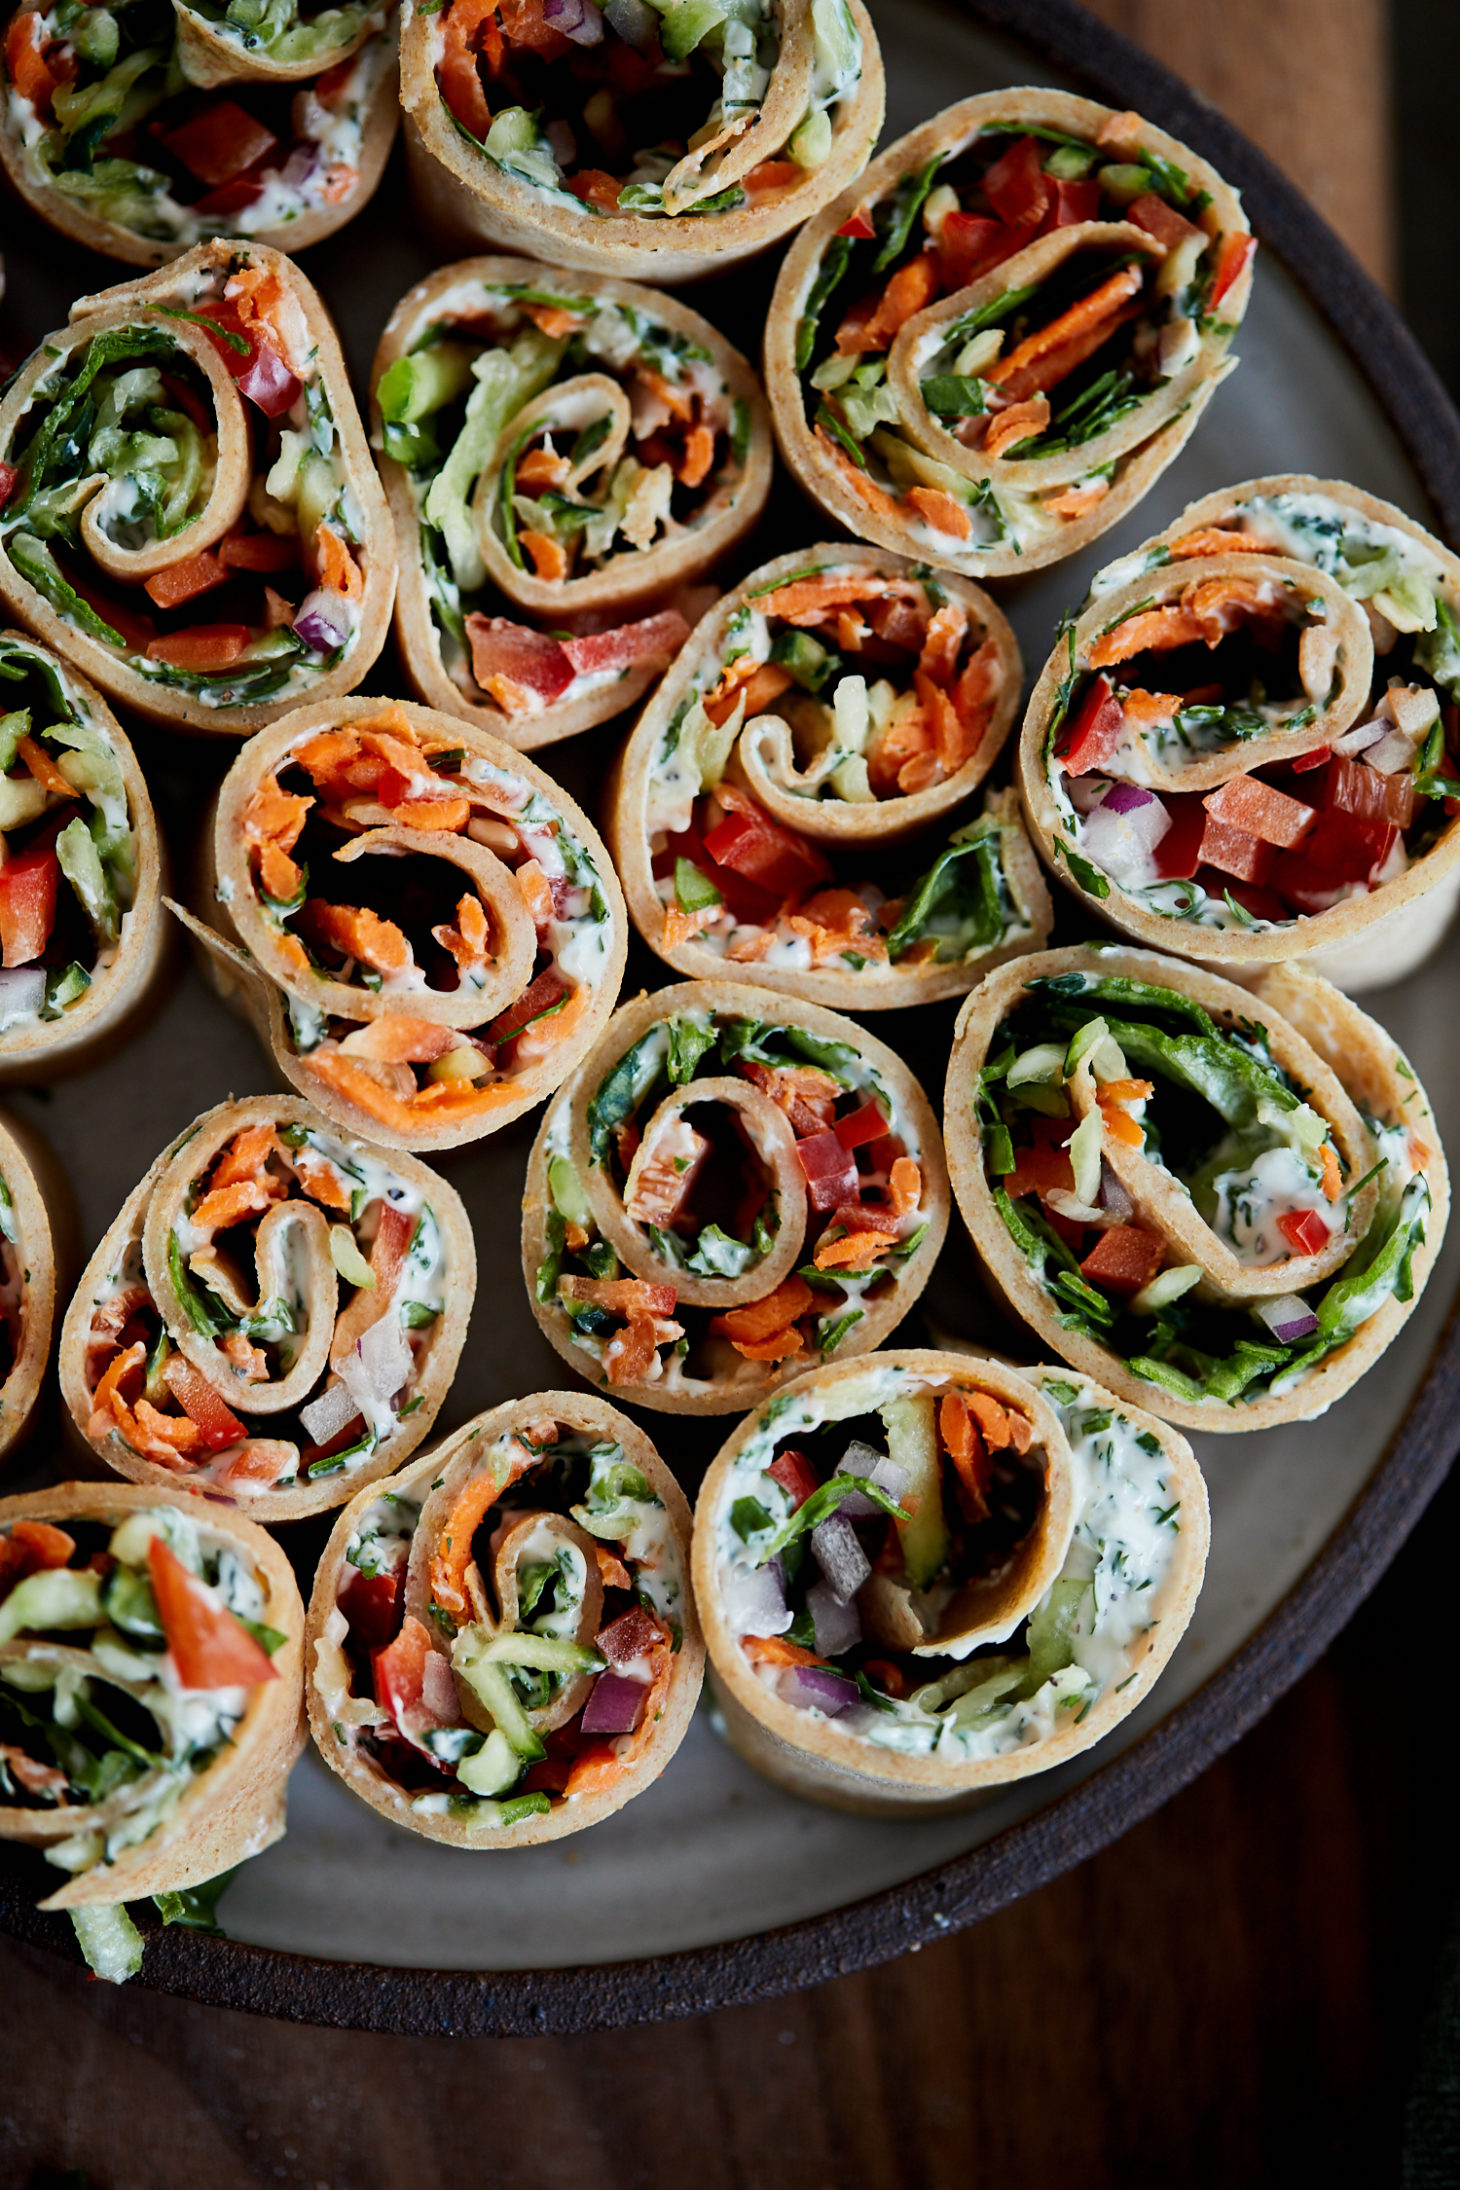 Overhead photograph of cut-open roll-ups showing vegetables, cream cheese, and crepes.